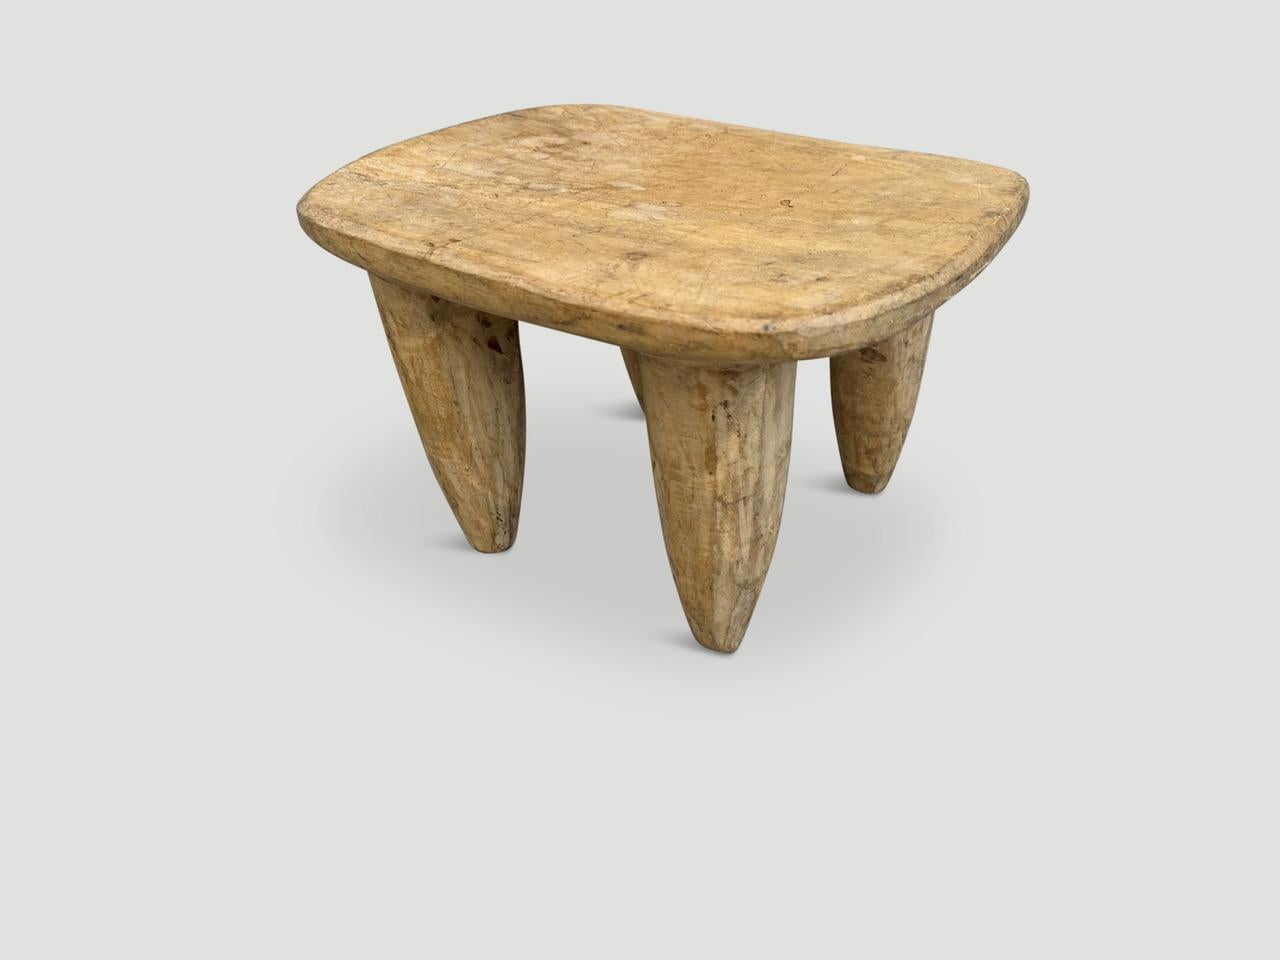 Beautiful antique side table or stool hand carved by the Senufo tribes from a single block of mahogany wood native to the west coast of Africa. The wood is tough, dense and very durable. Shown with cone style legs. The light tone wood on this one is